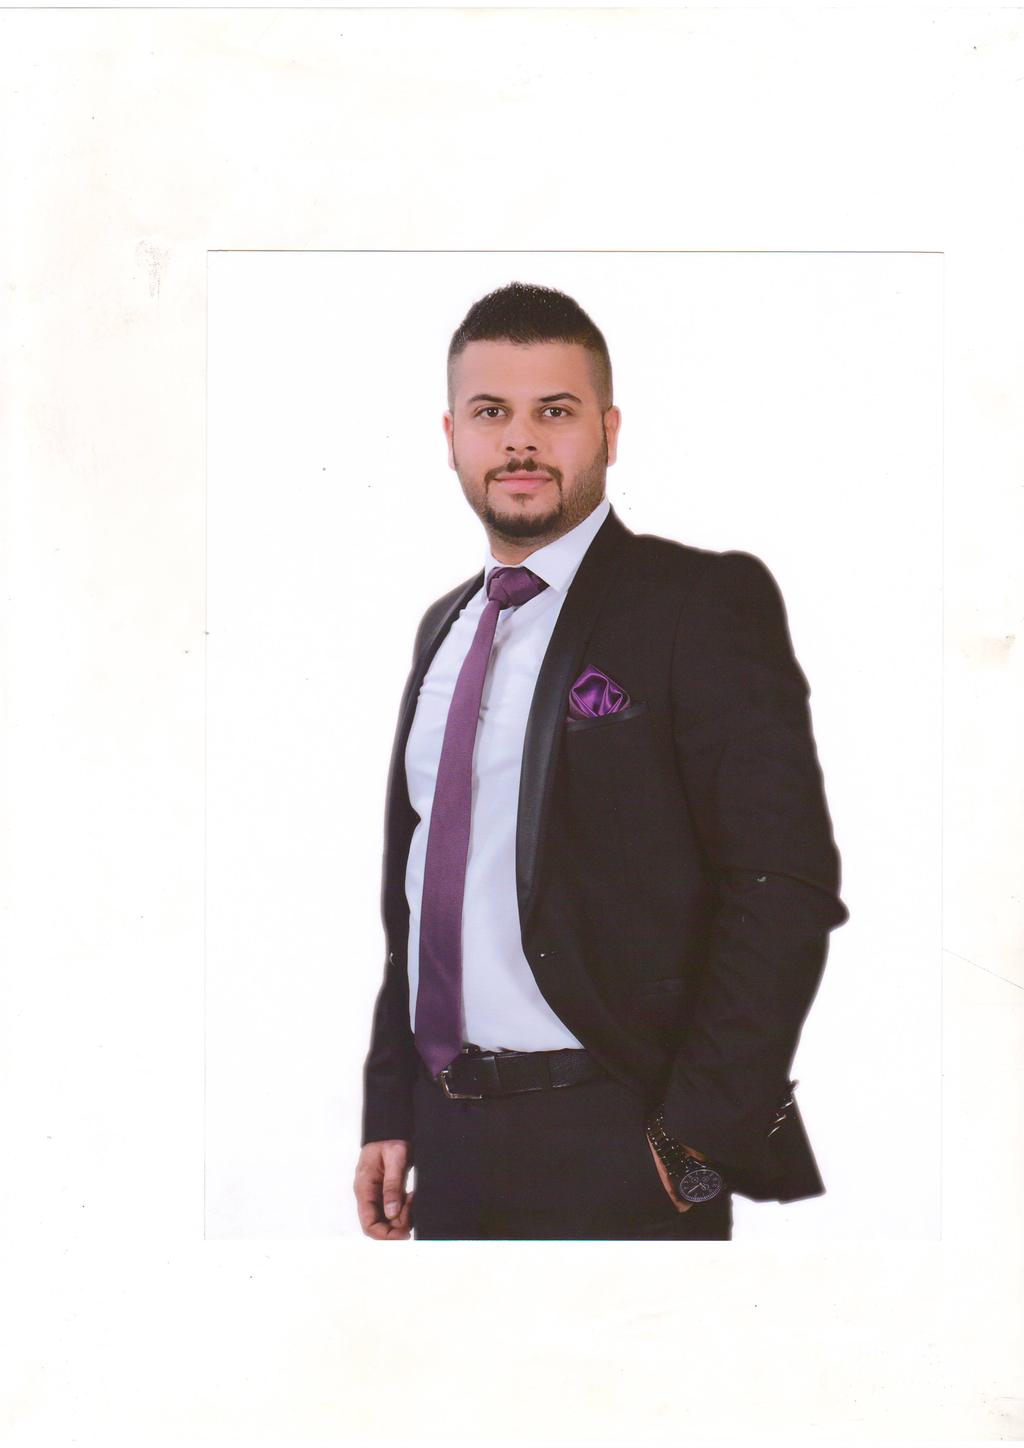 Karwan Jalal Associate Karwan has over 10 years experience in the industry, with previous positions including Lecturer at the Department of Accounting and Finance at the Lebanese French University